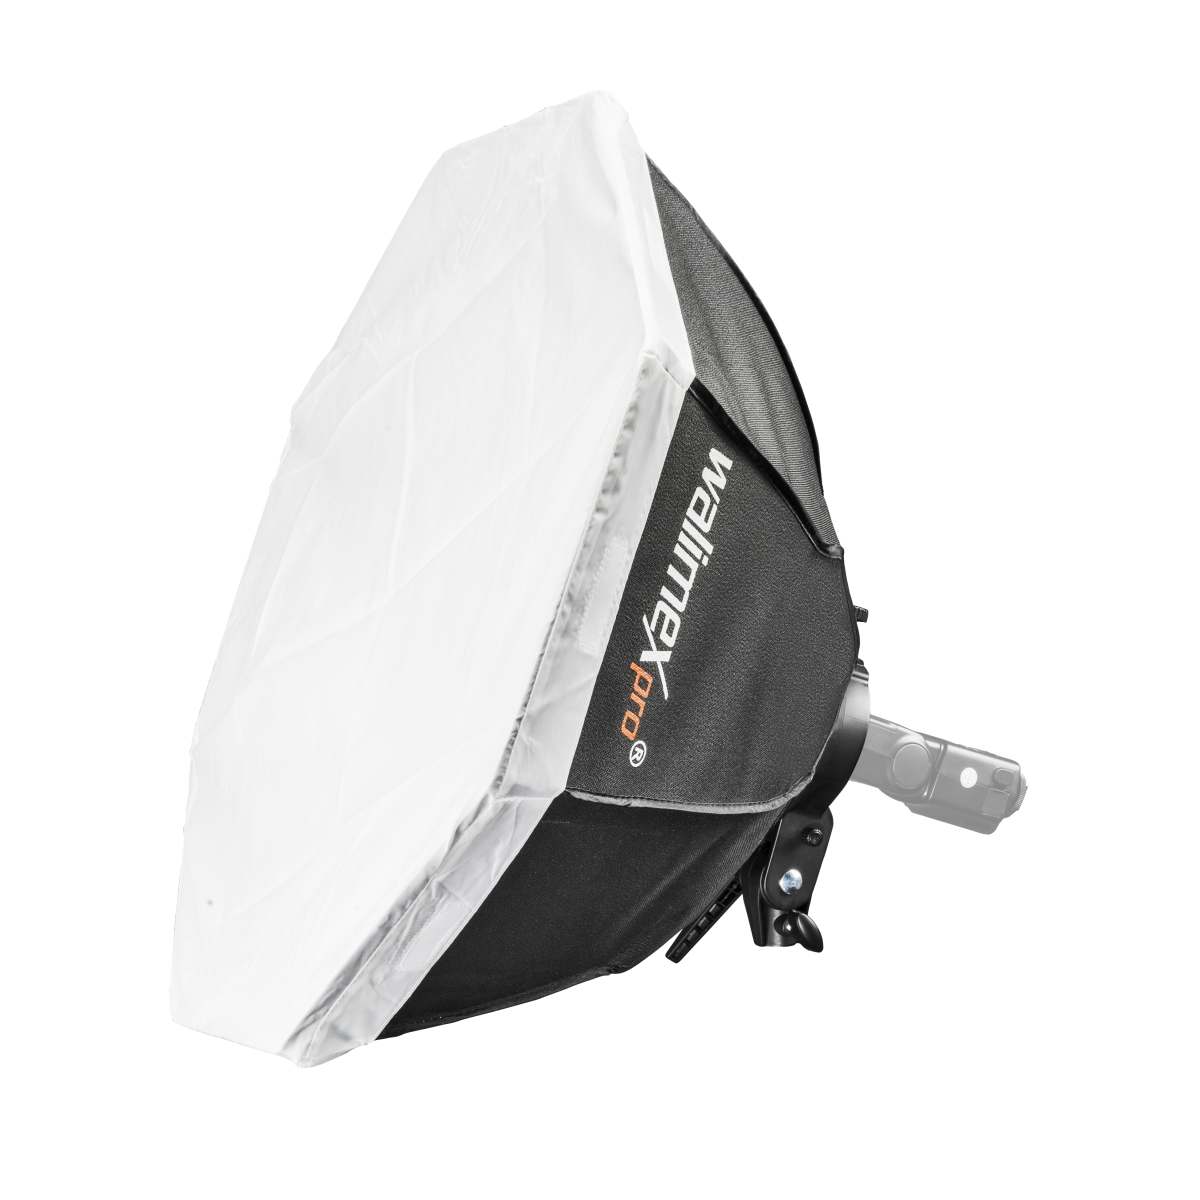 Walimex Octagon Softbox  60cm for Compact Flashes